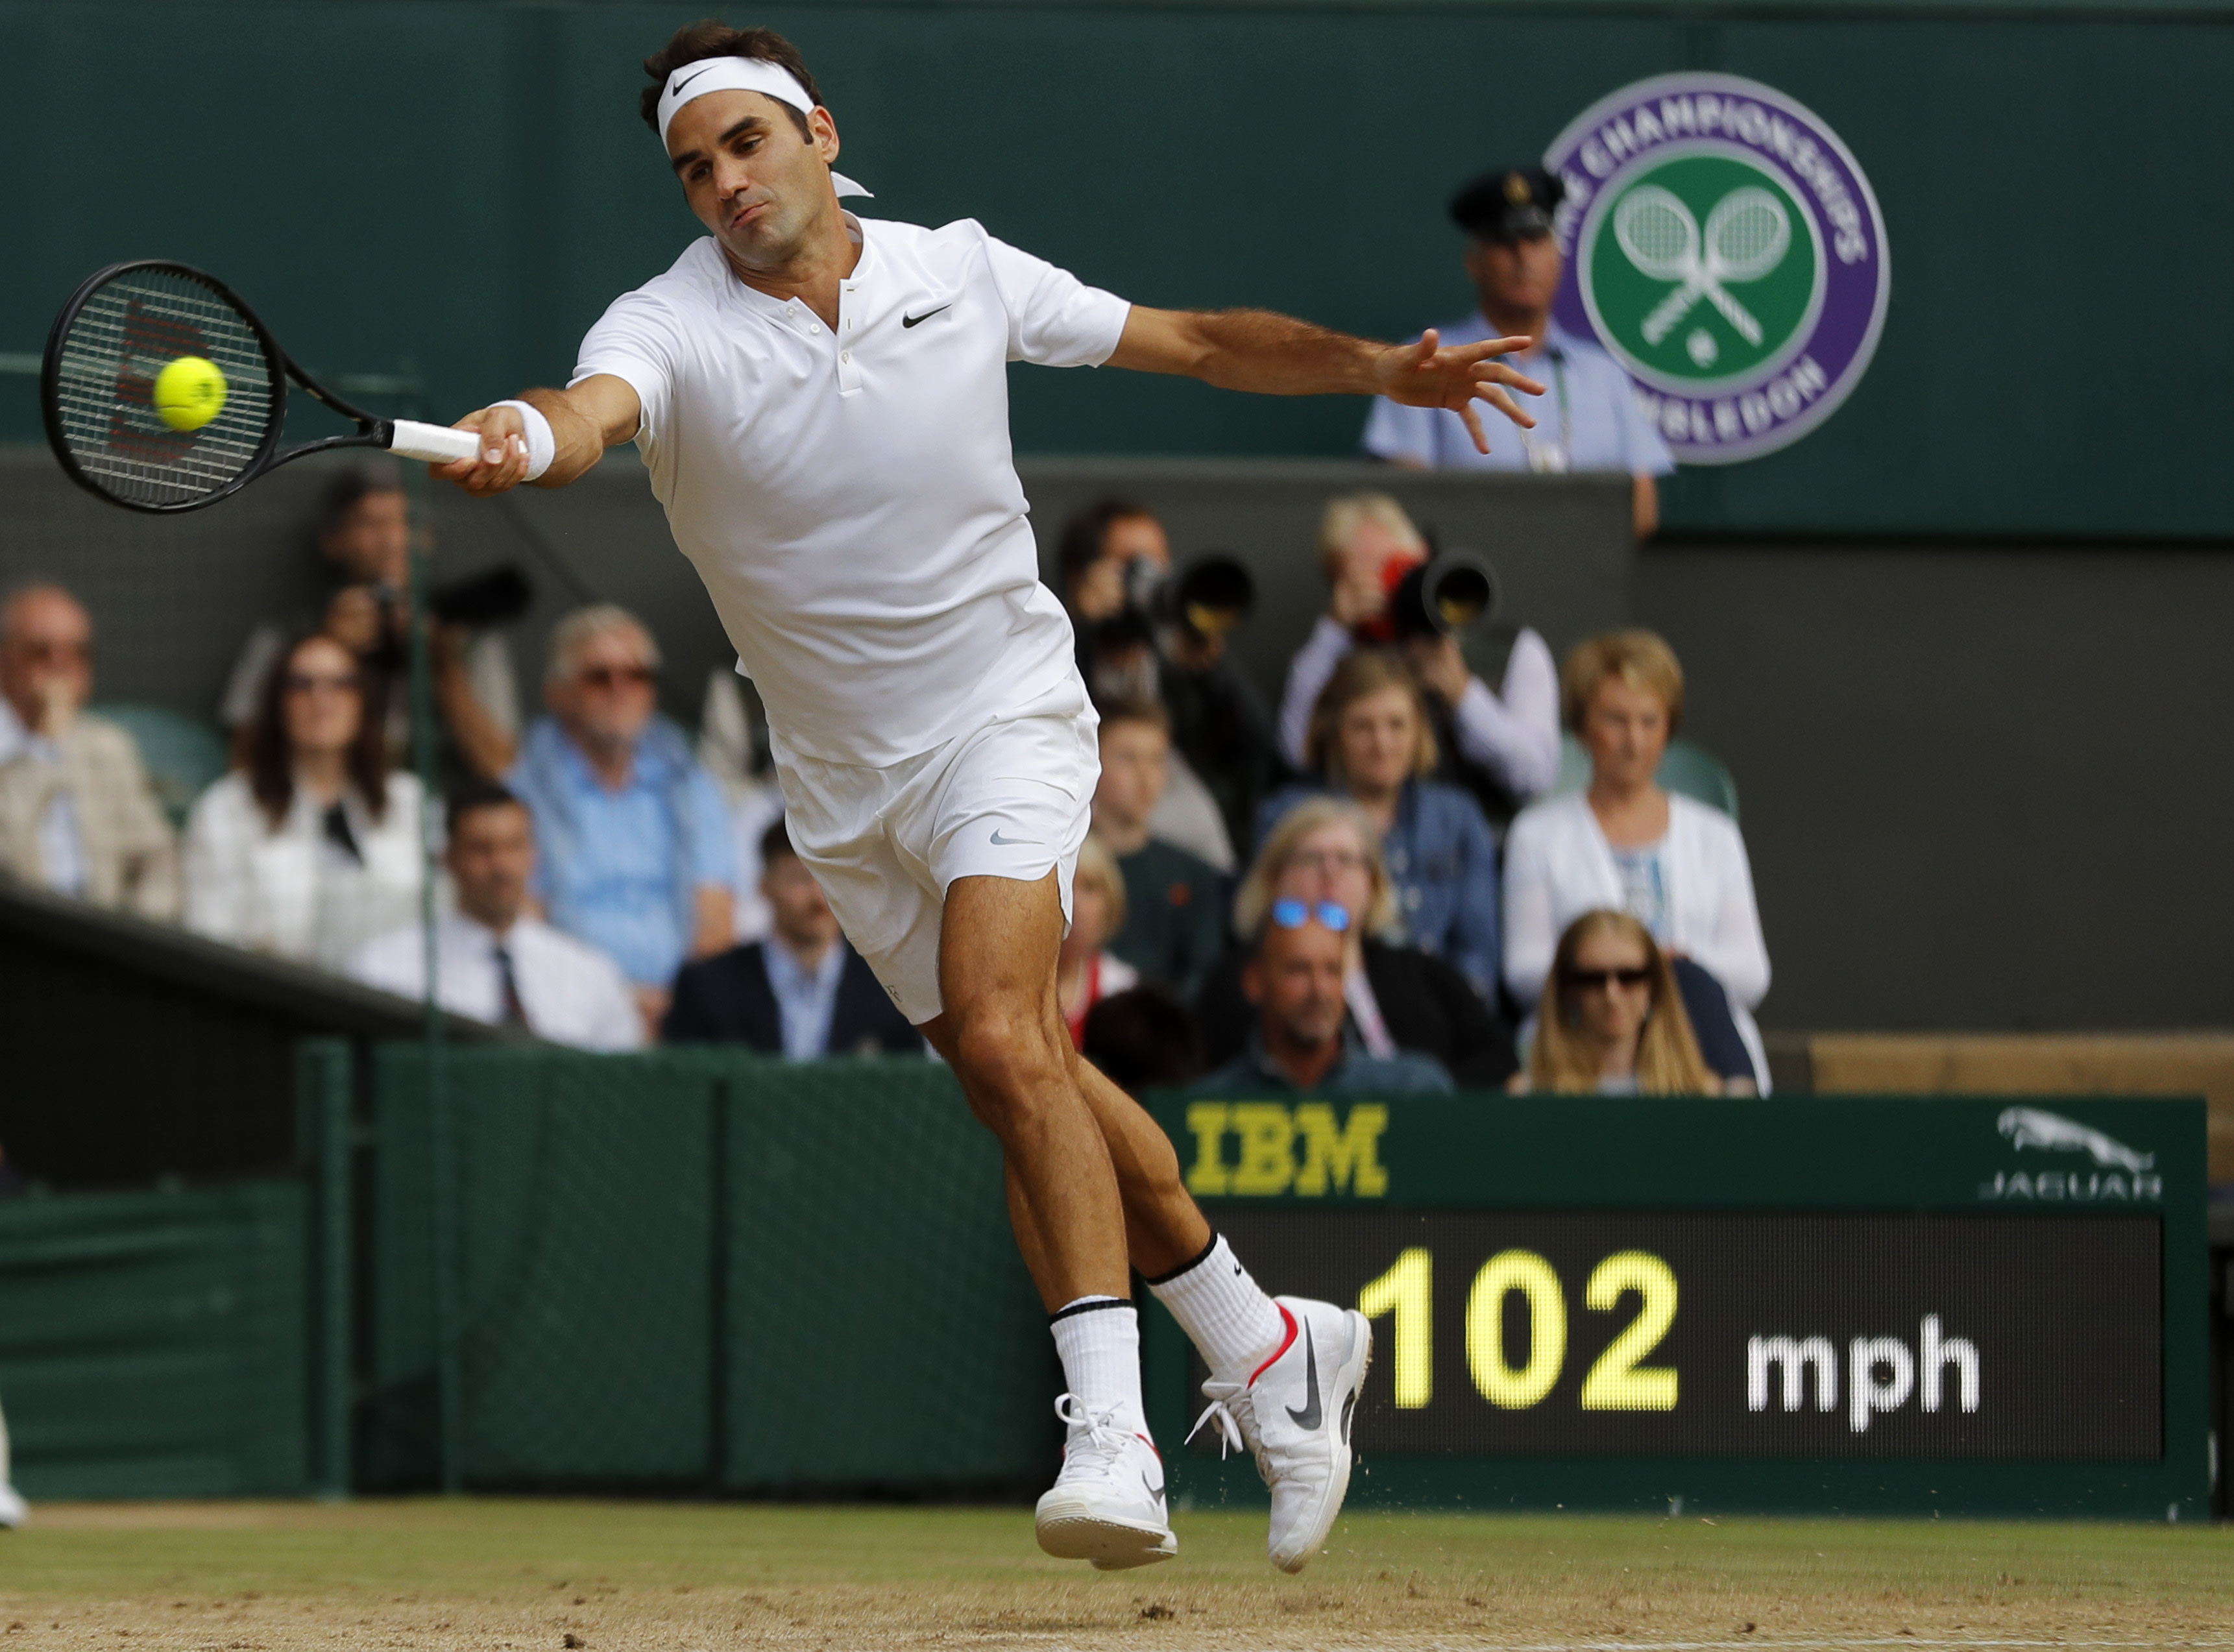 14 years after first Wimbledon win, Federer eyes eighth vs. Cilic